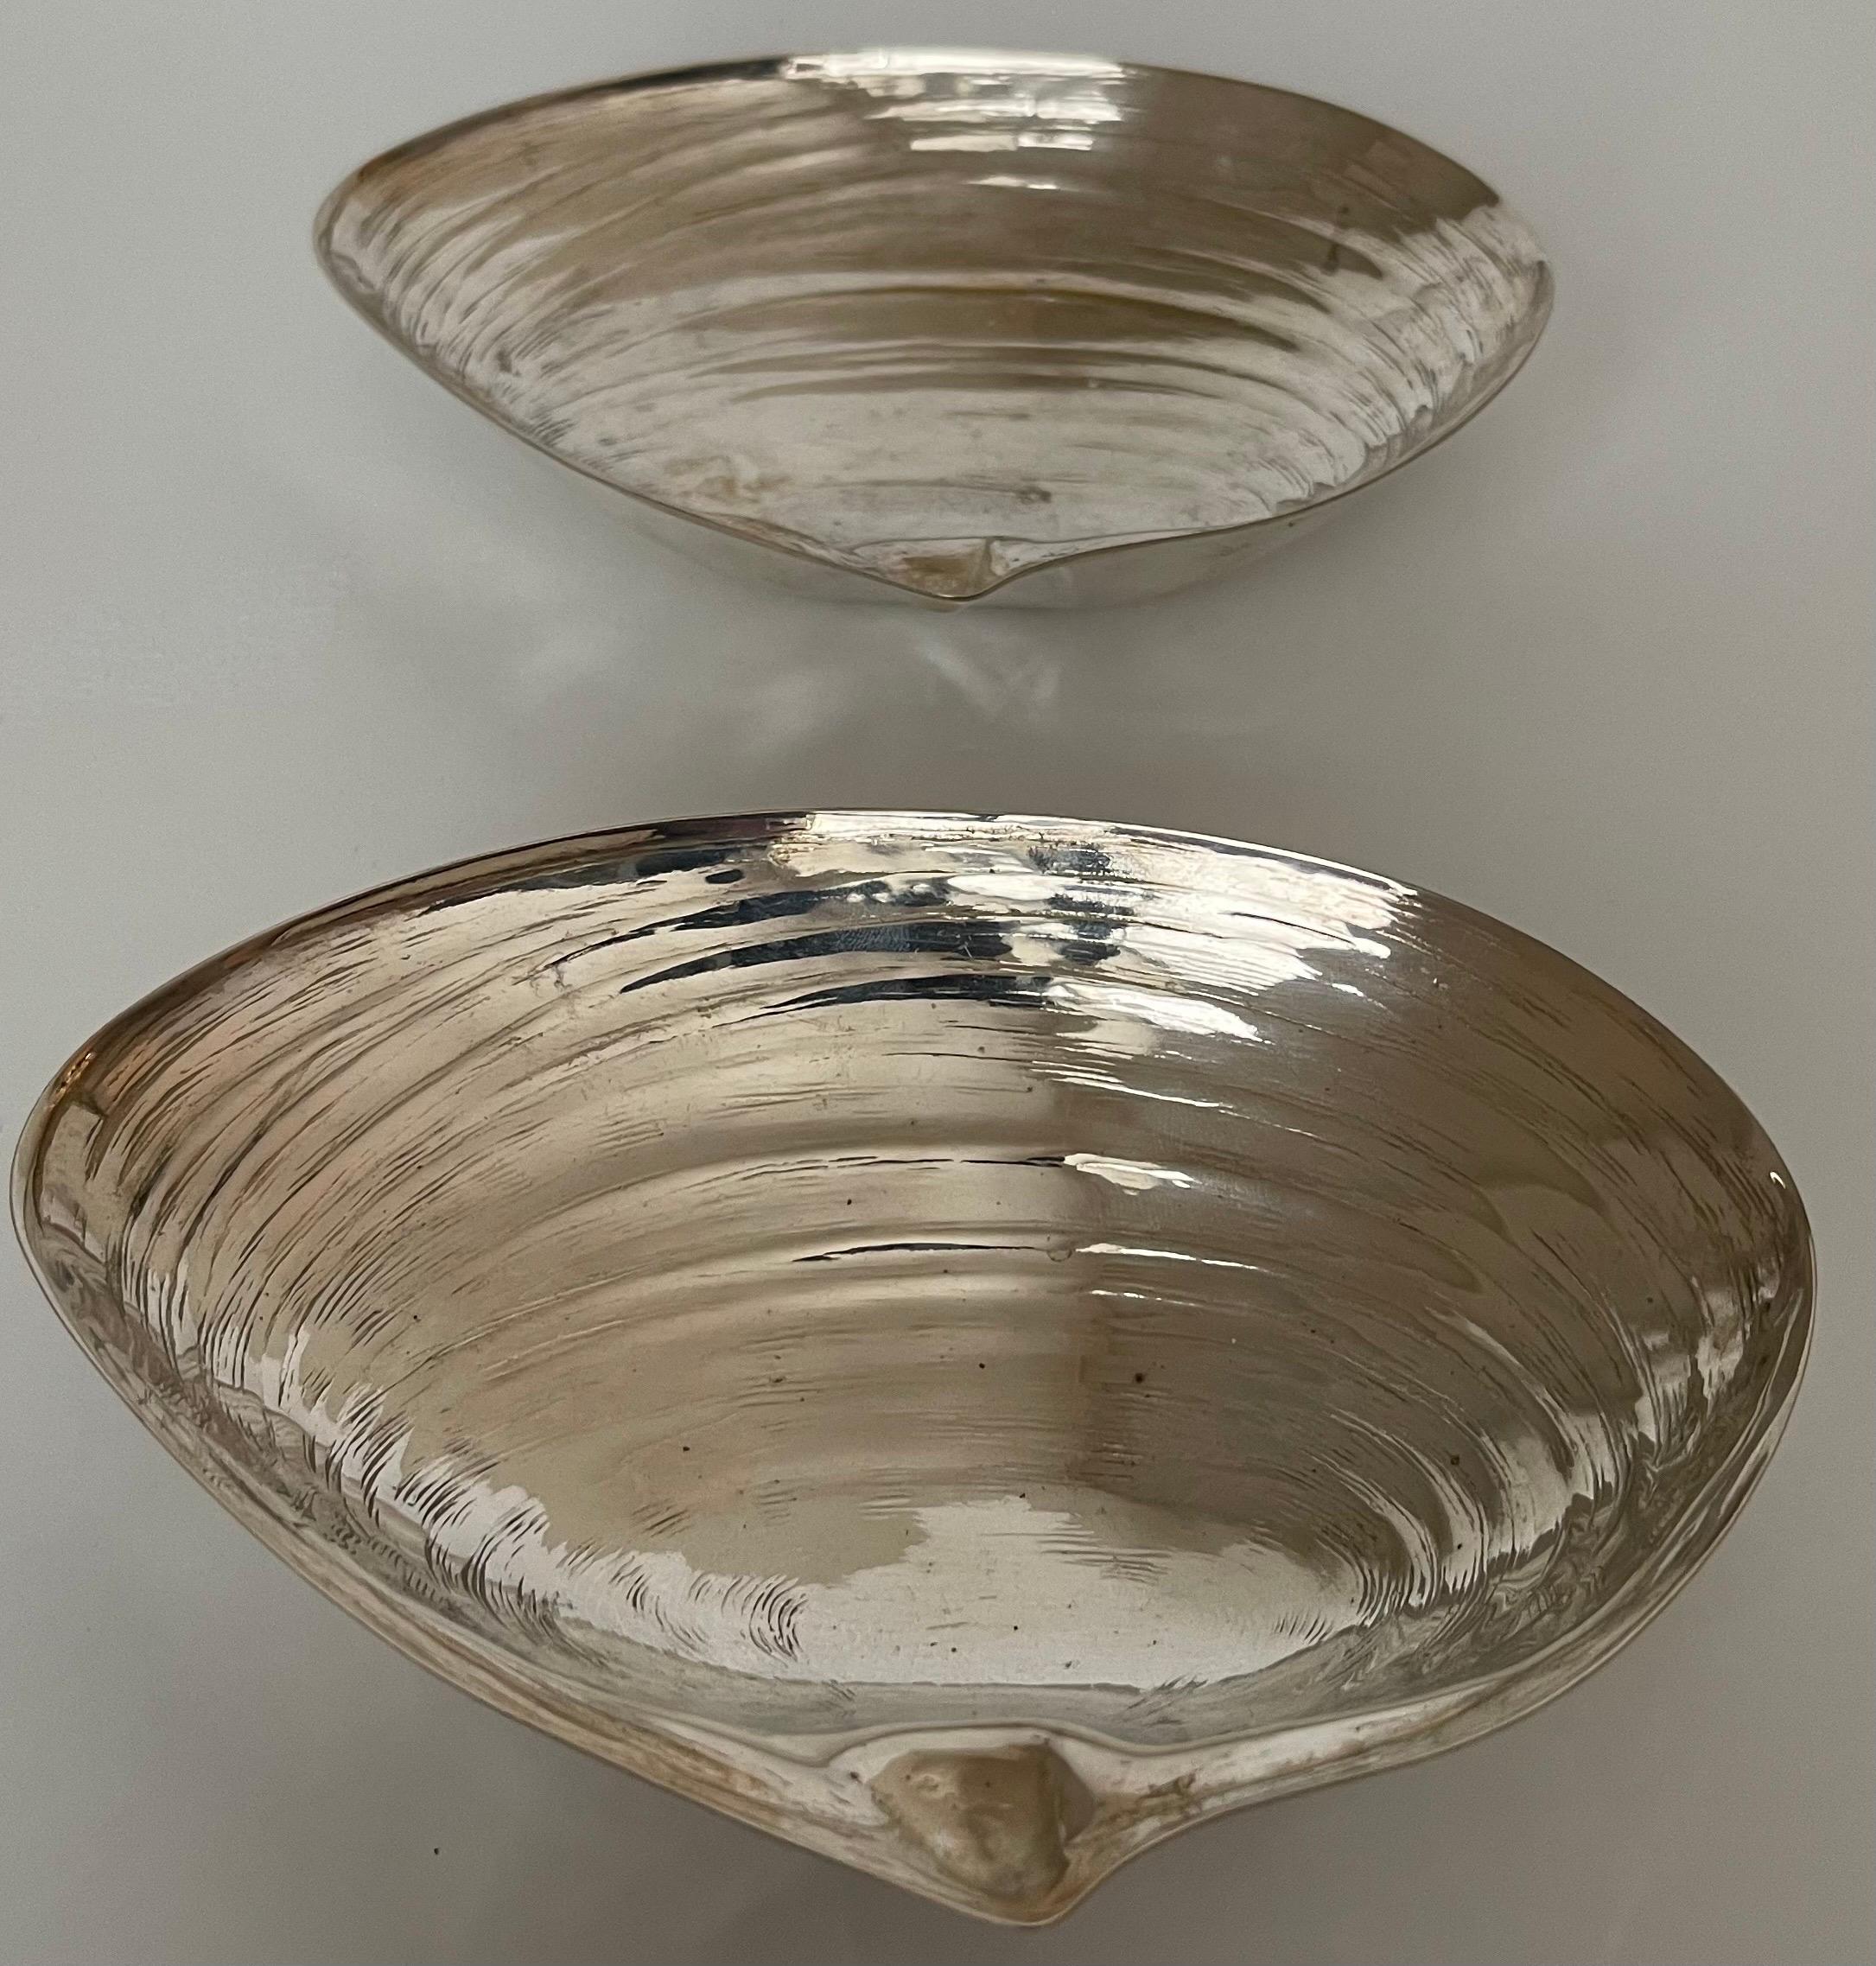 Silver Plated Shell Form Candy Dishes or Ashtrays, Pair For Sale 3